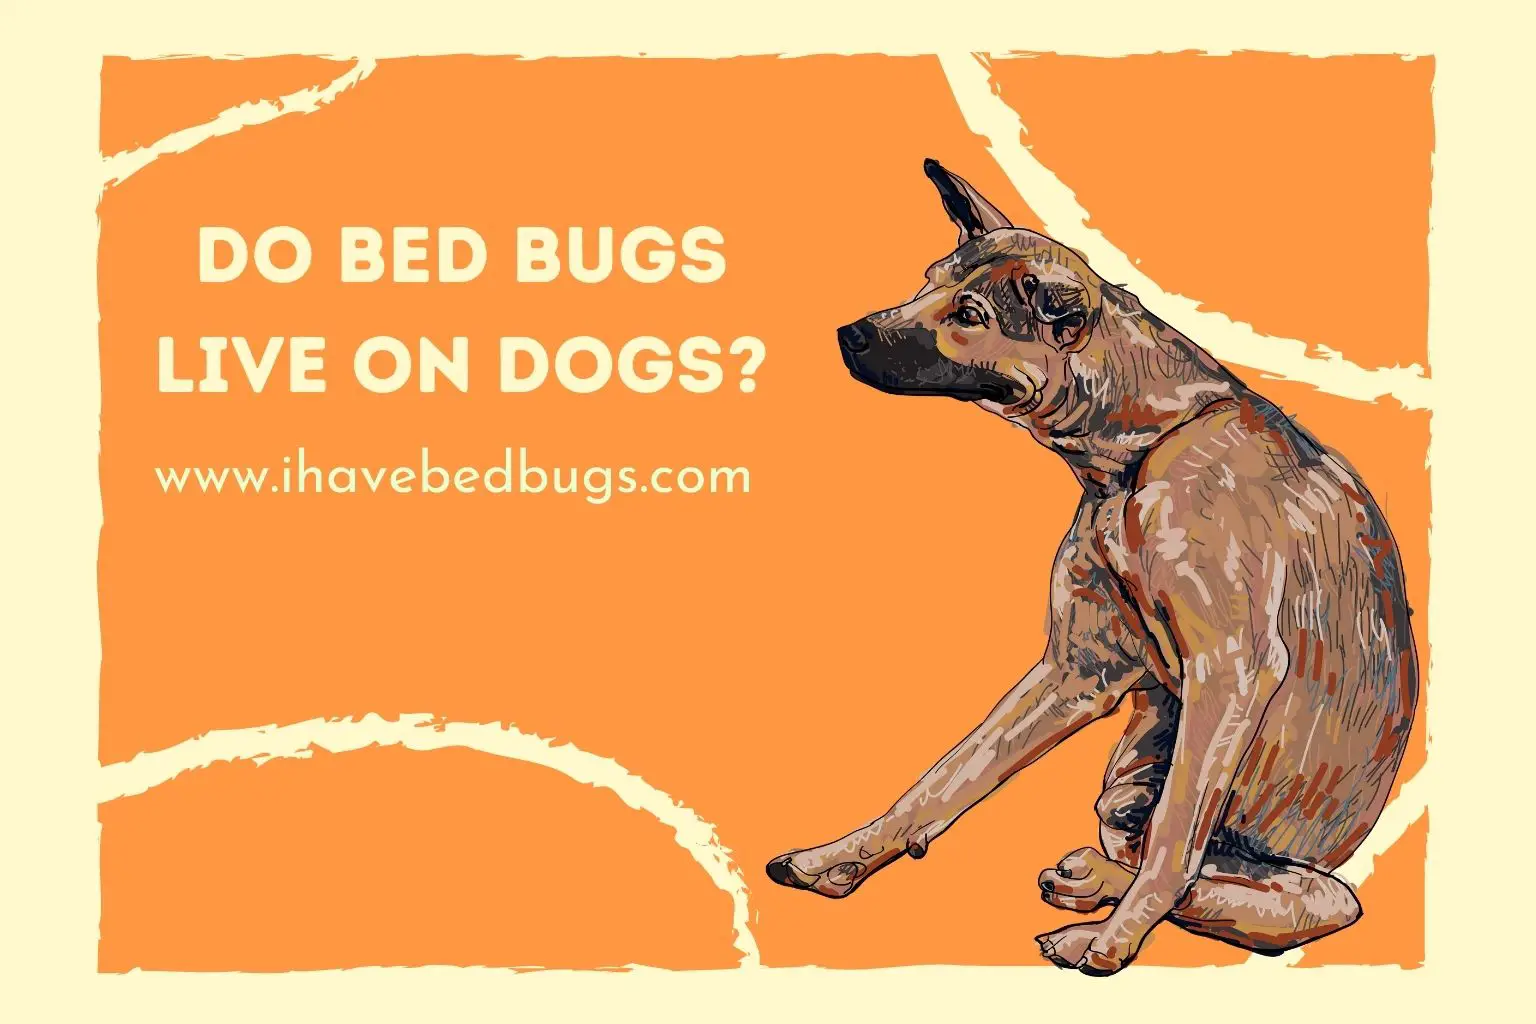 Do bed bugs live on dogs